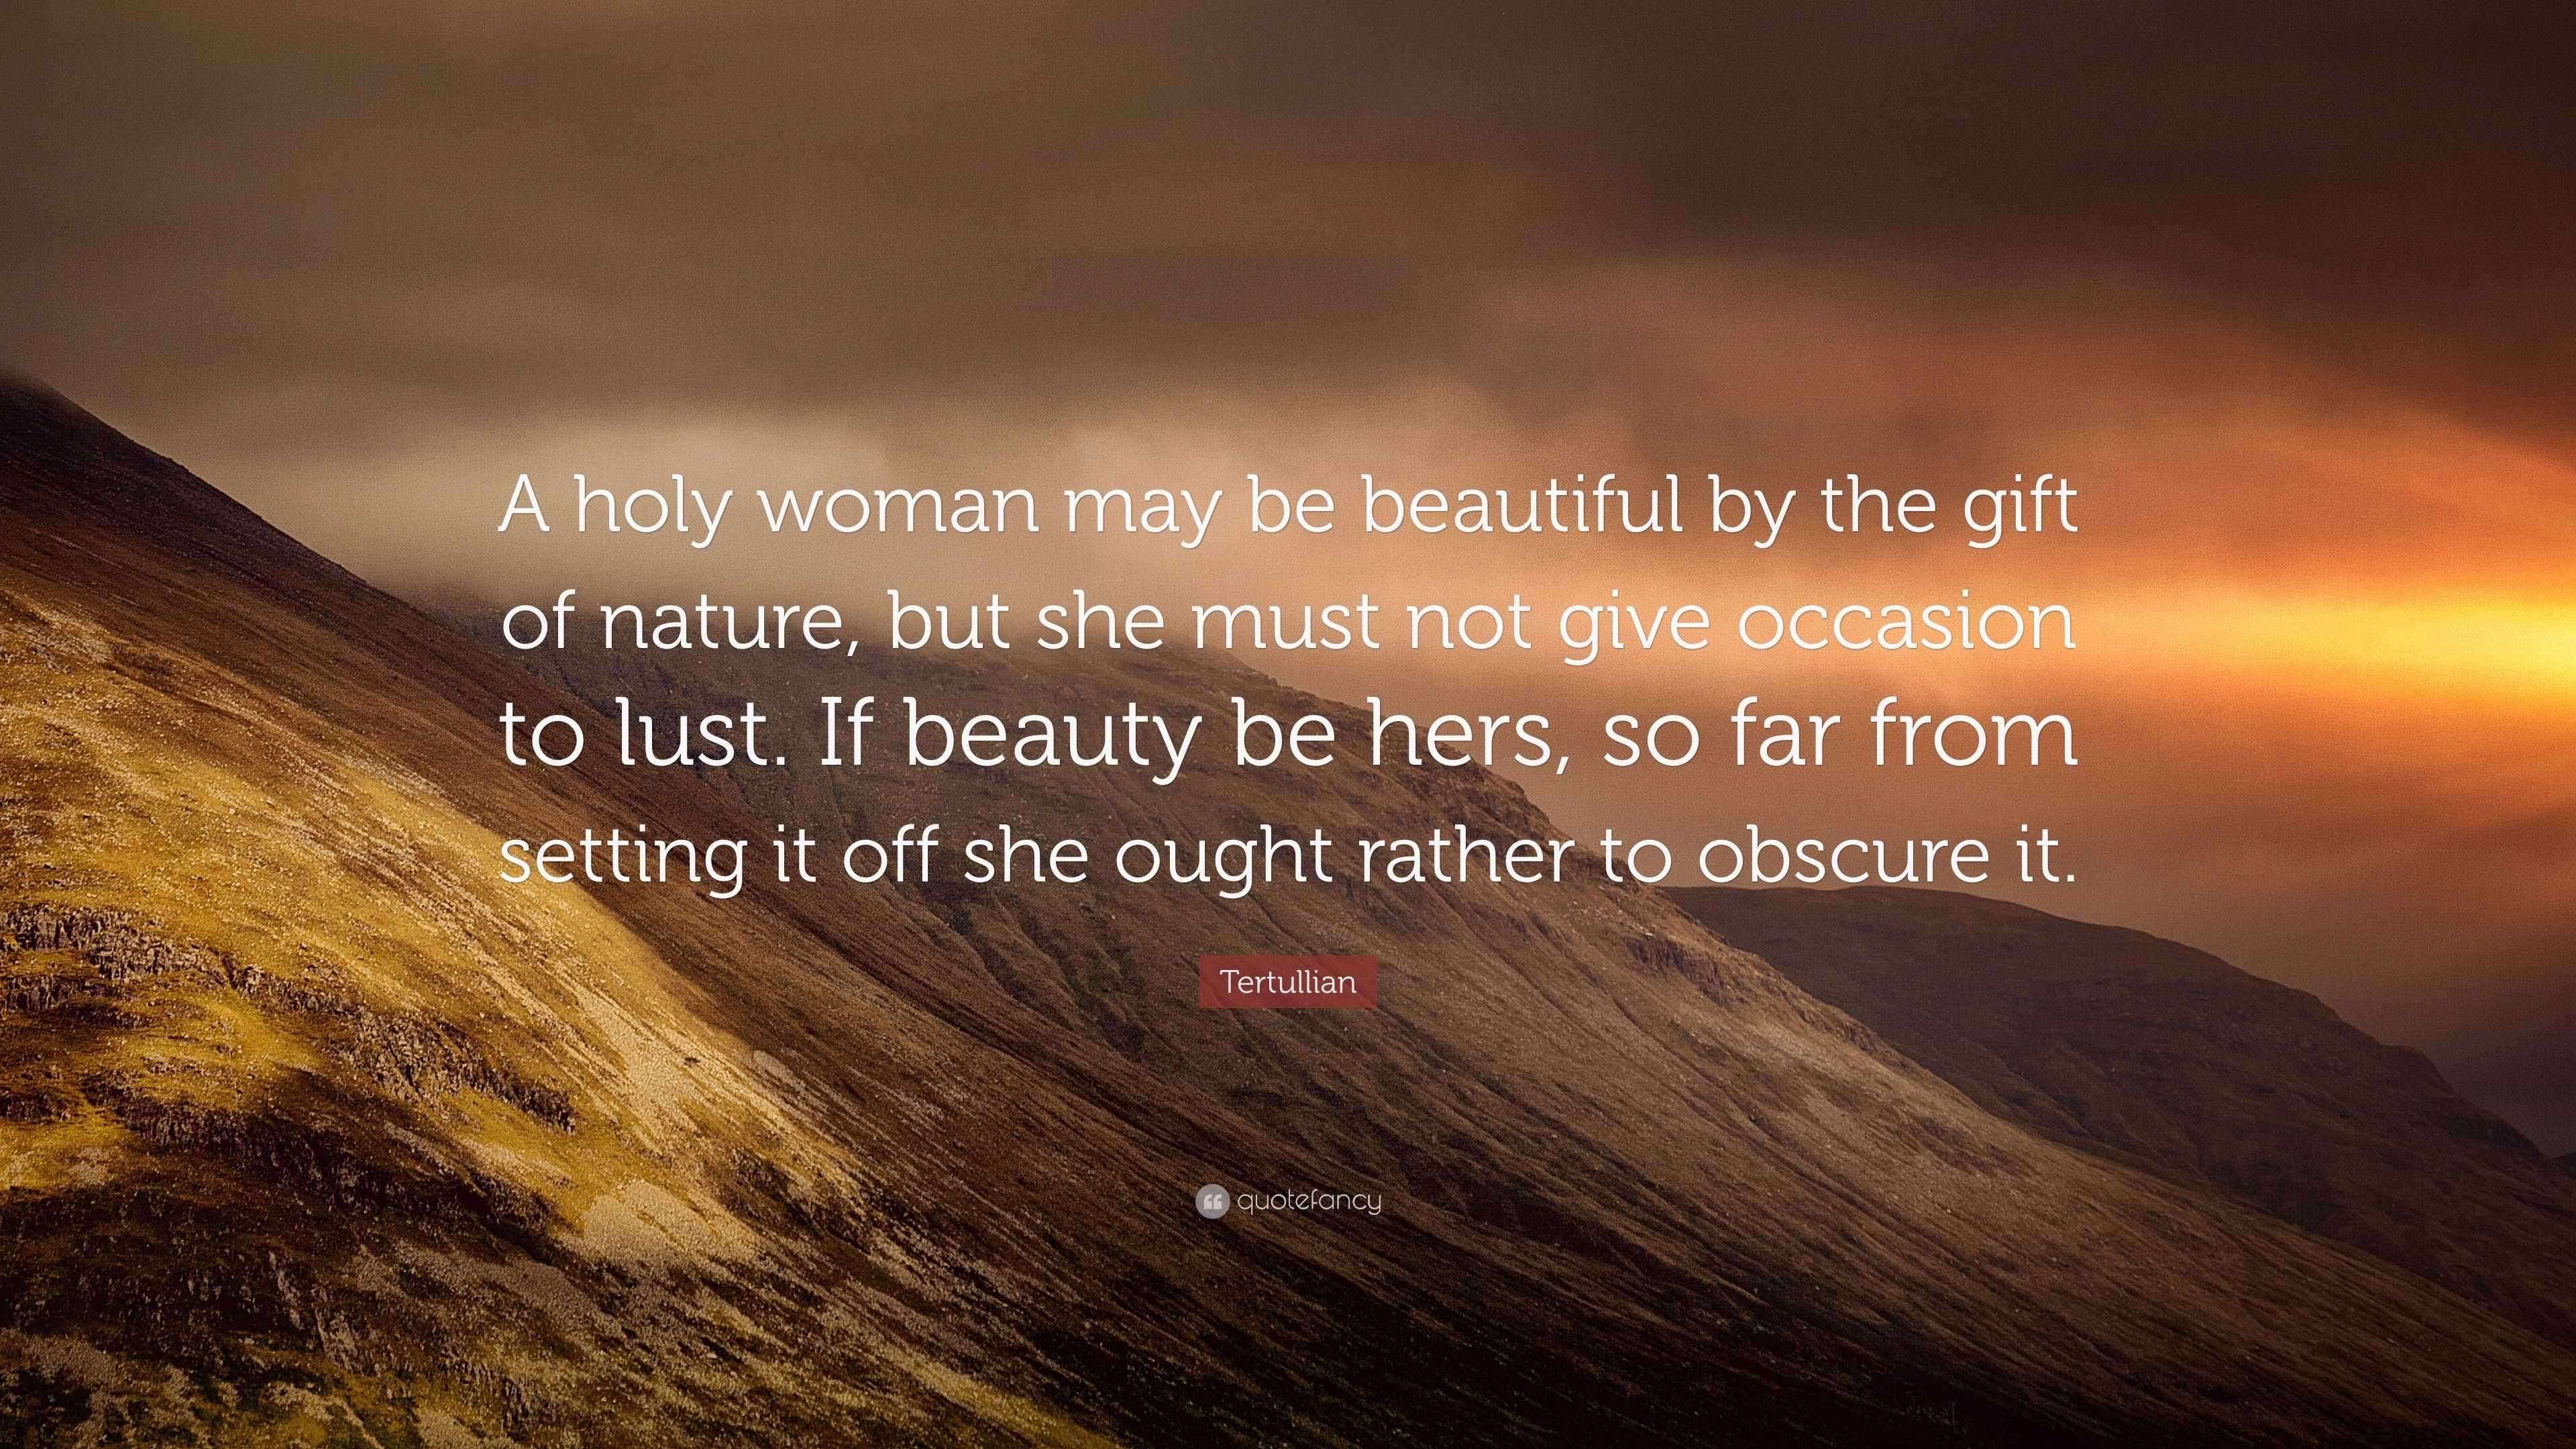 Tertullian Quote: “A holy woman may be beautiful by the gift of nature, but  she must not give occasion to lust. If beauty be hers, so far f...”